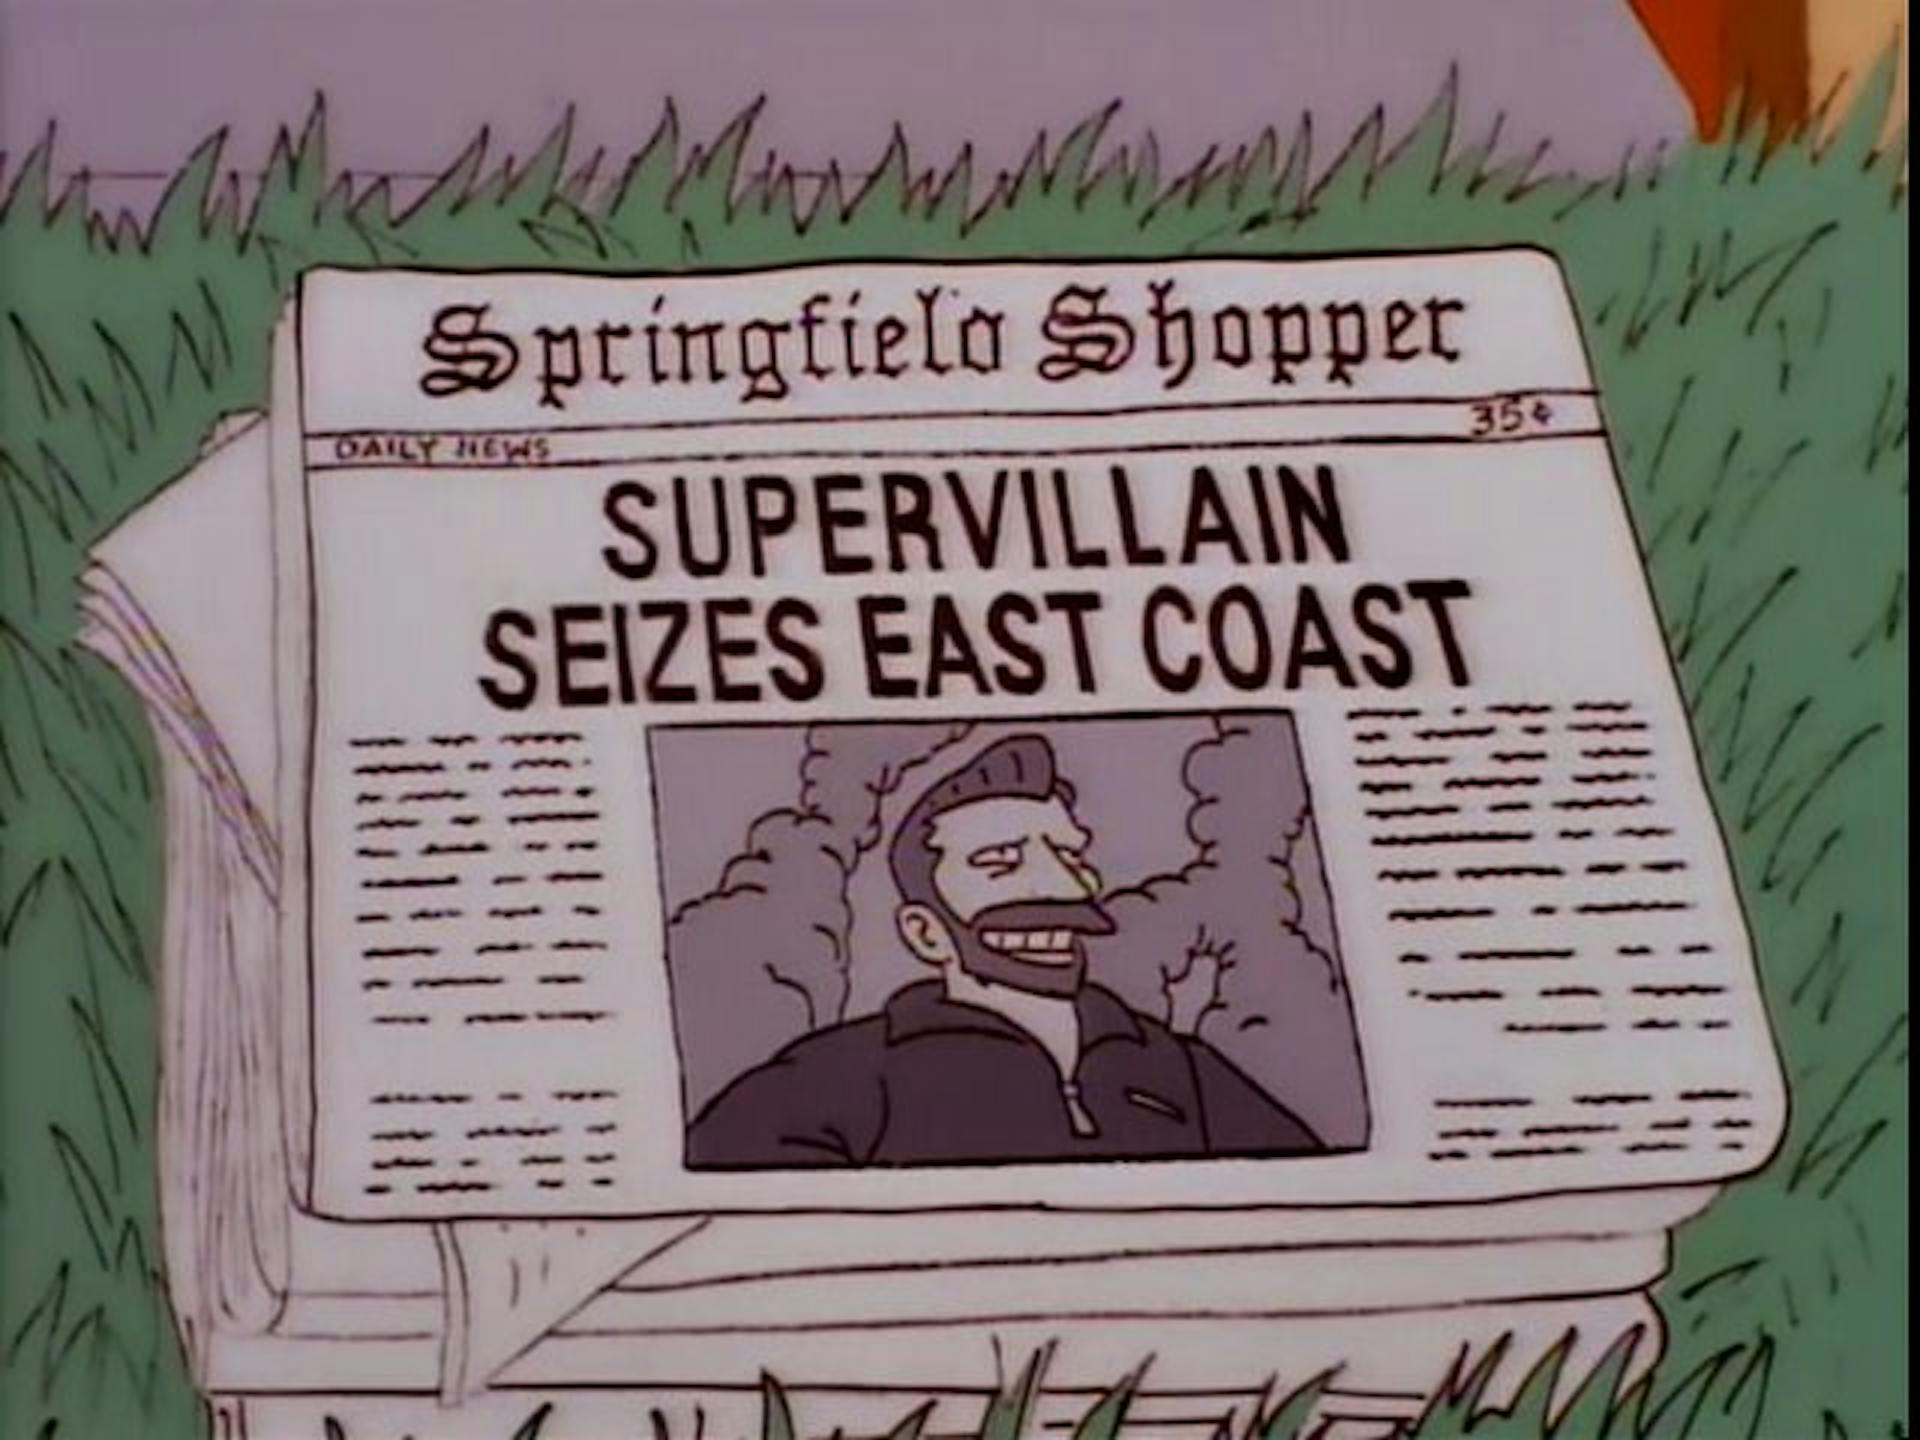 The front page of a newspaper with the headline "Supervillain seizes East Coast."